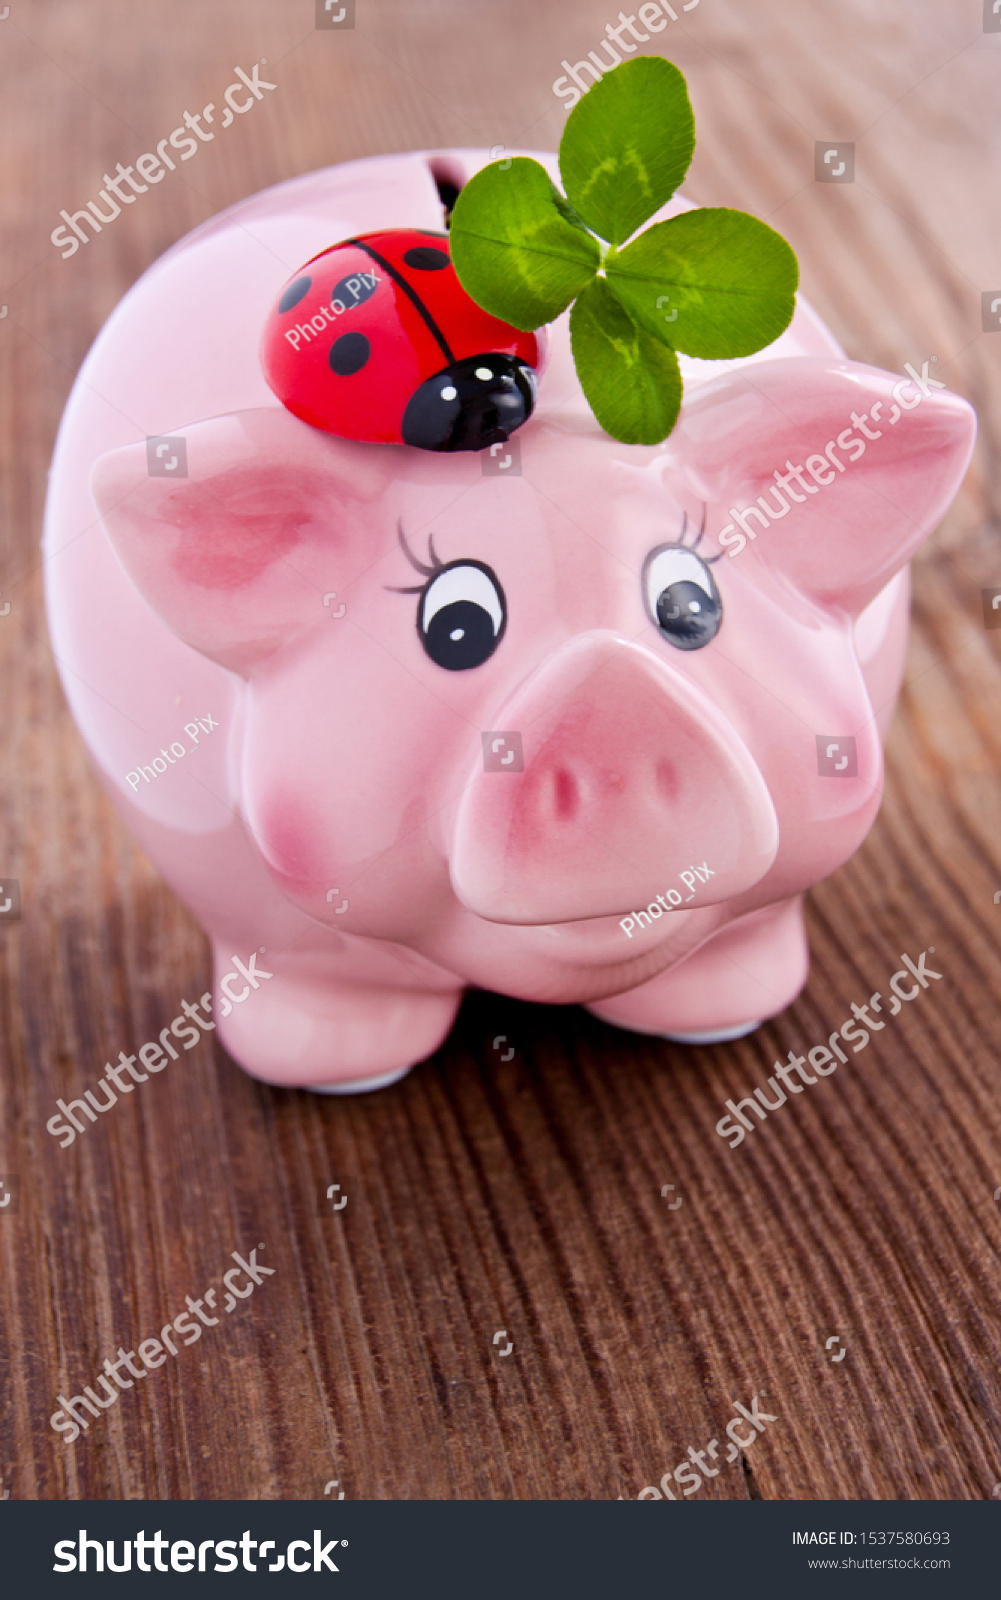 Pink lucky pig with lucky clover on a wooden backgurd #1537580693